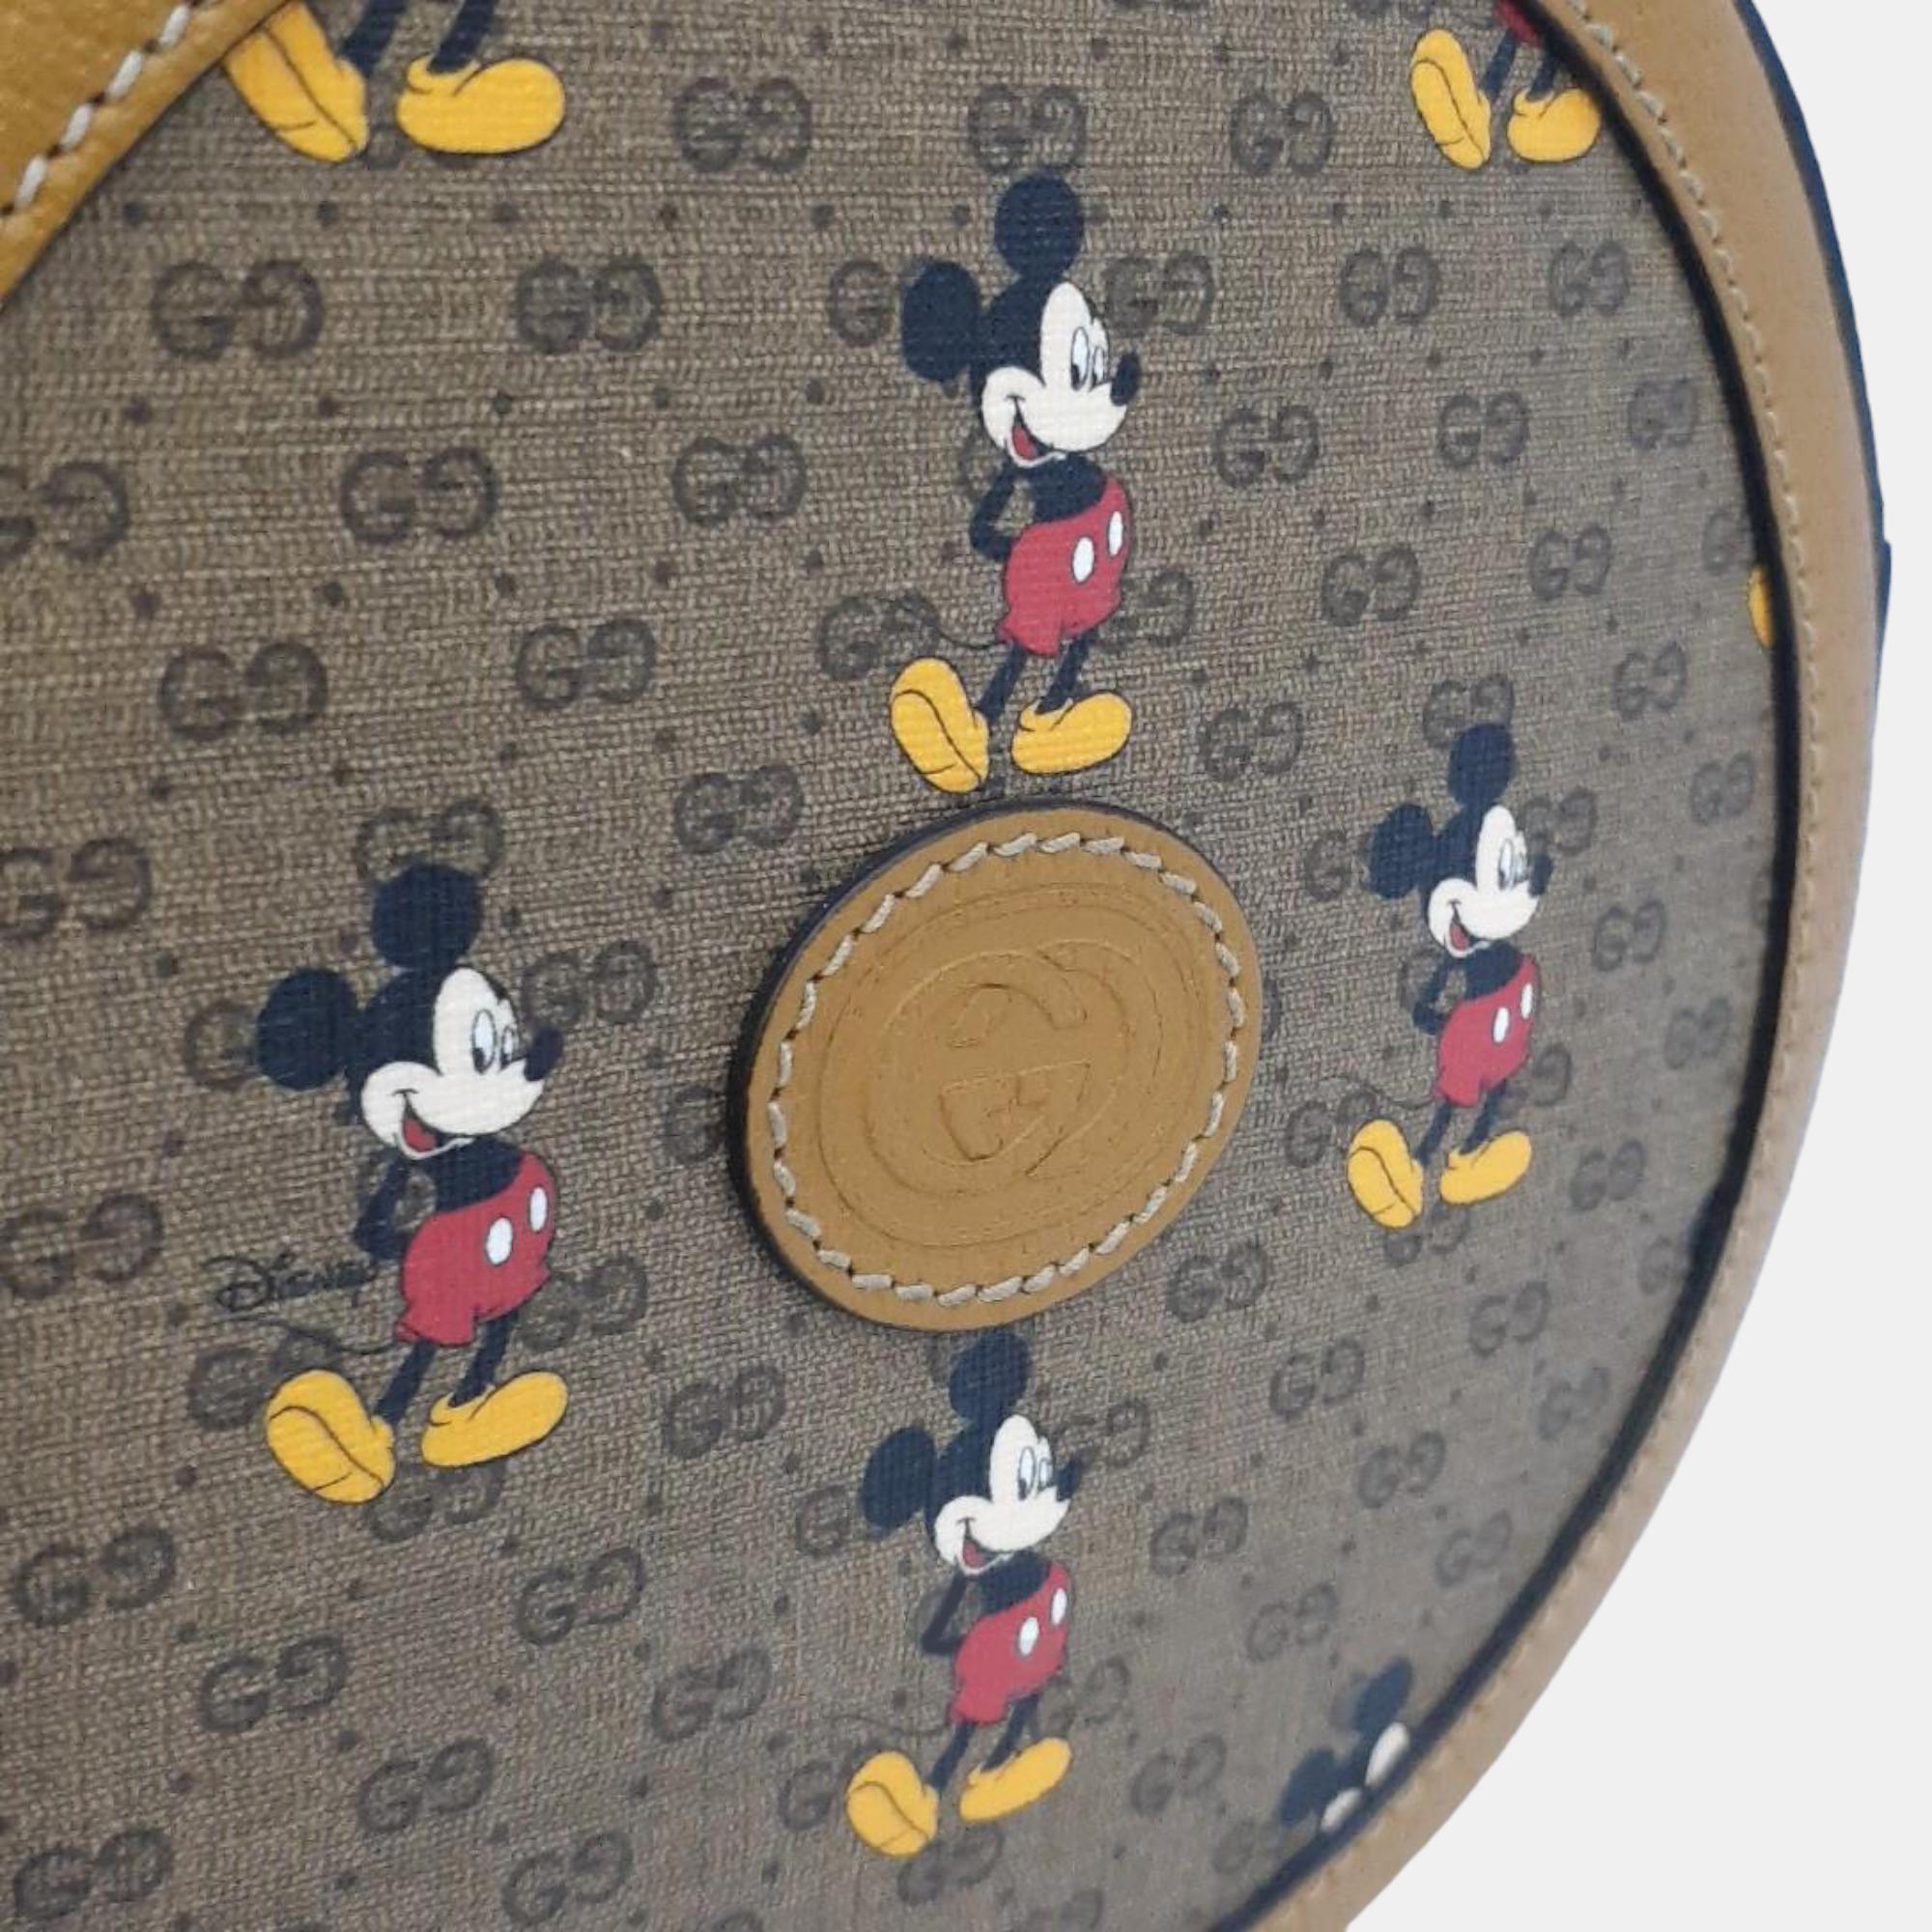 Gucci X Disney Mickey Mouse Collaboration Round Shoulder Bag